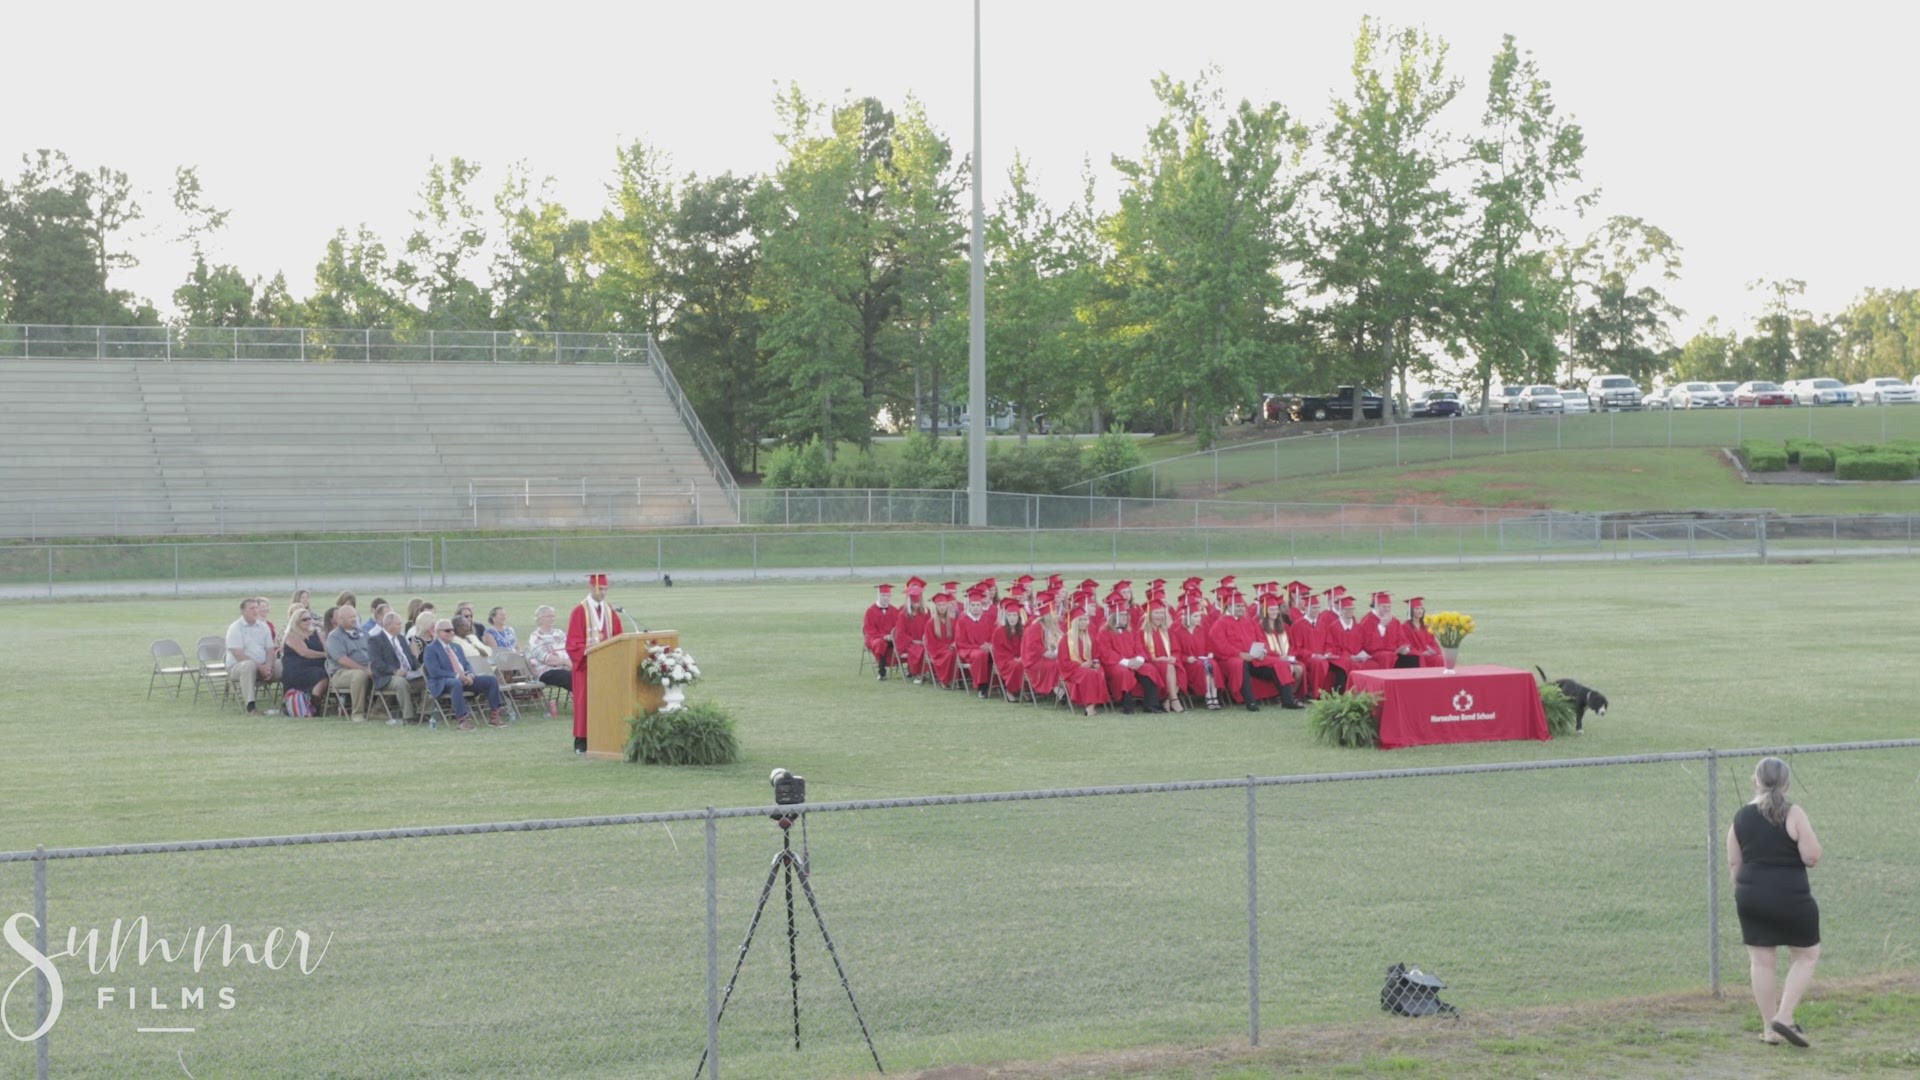 The Class of 2019 at an Alabama high school tried to keep it together as a dog made his mark on their graduation ceremony. (Video: Summer Films/Summer McKelvey)